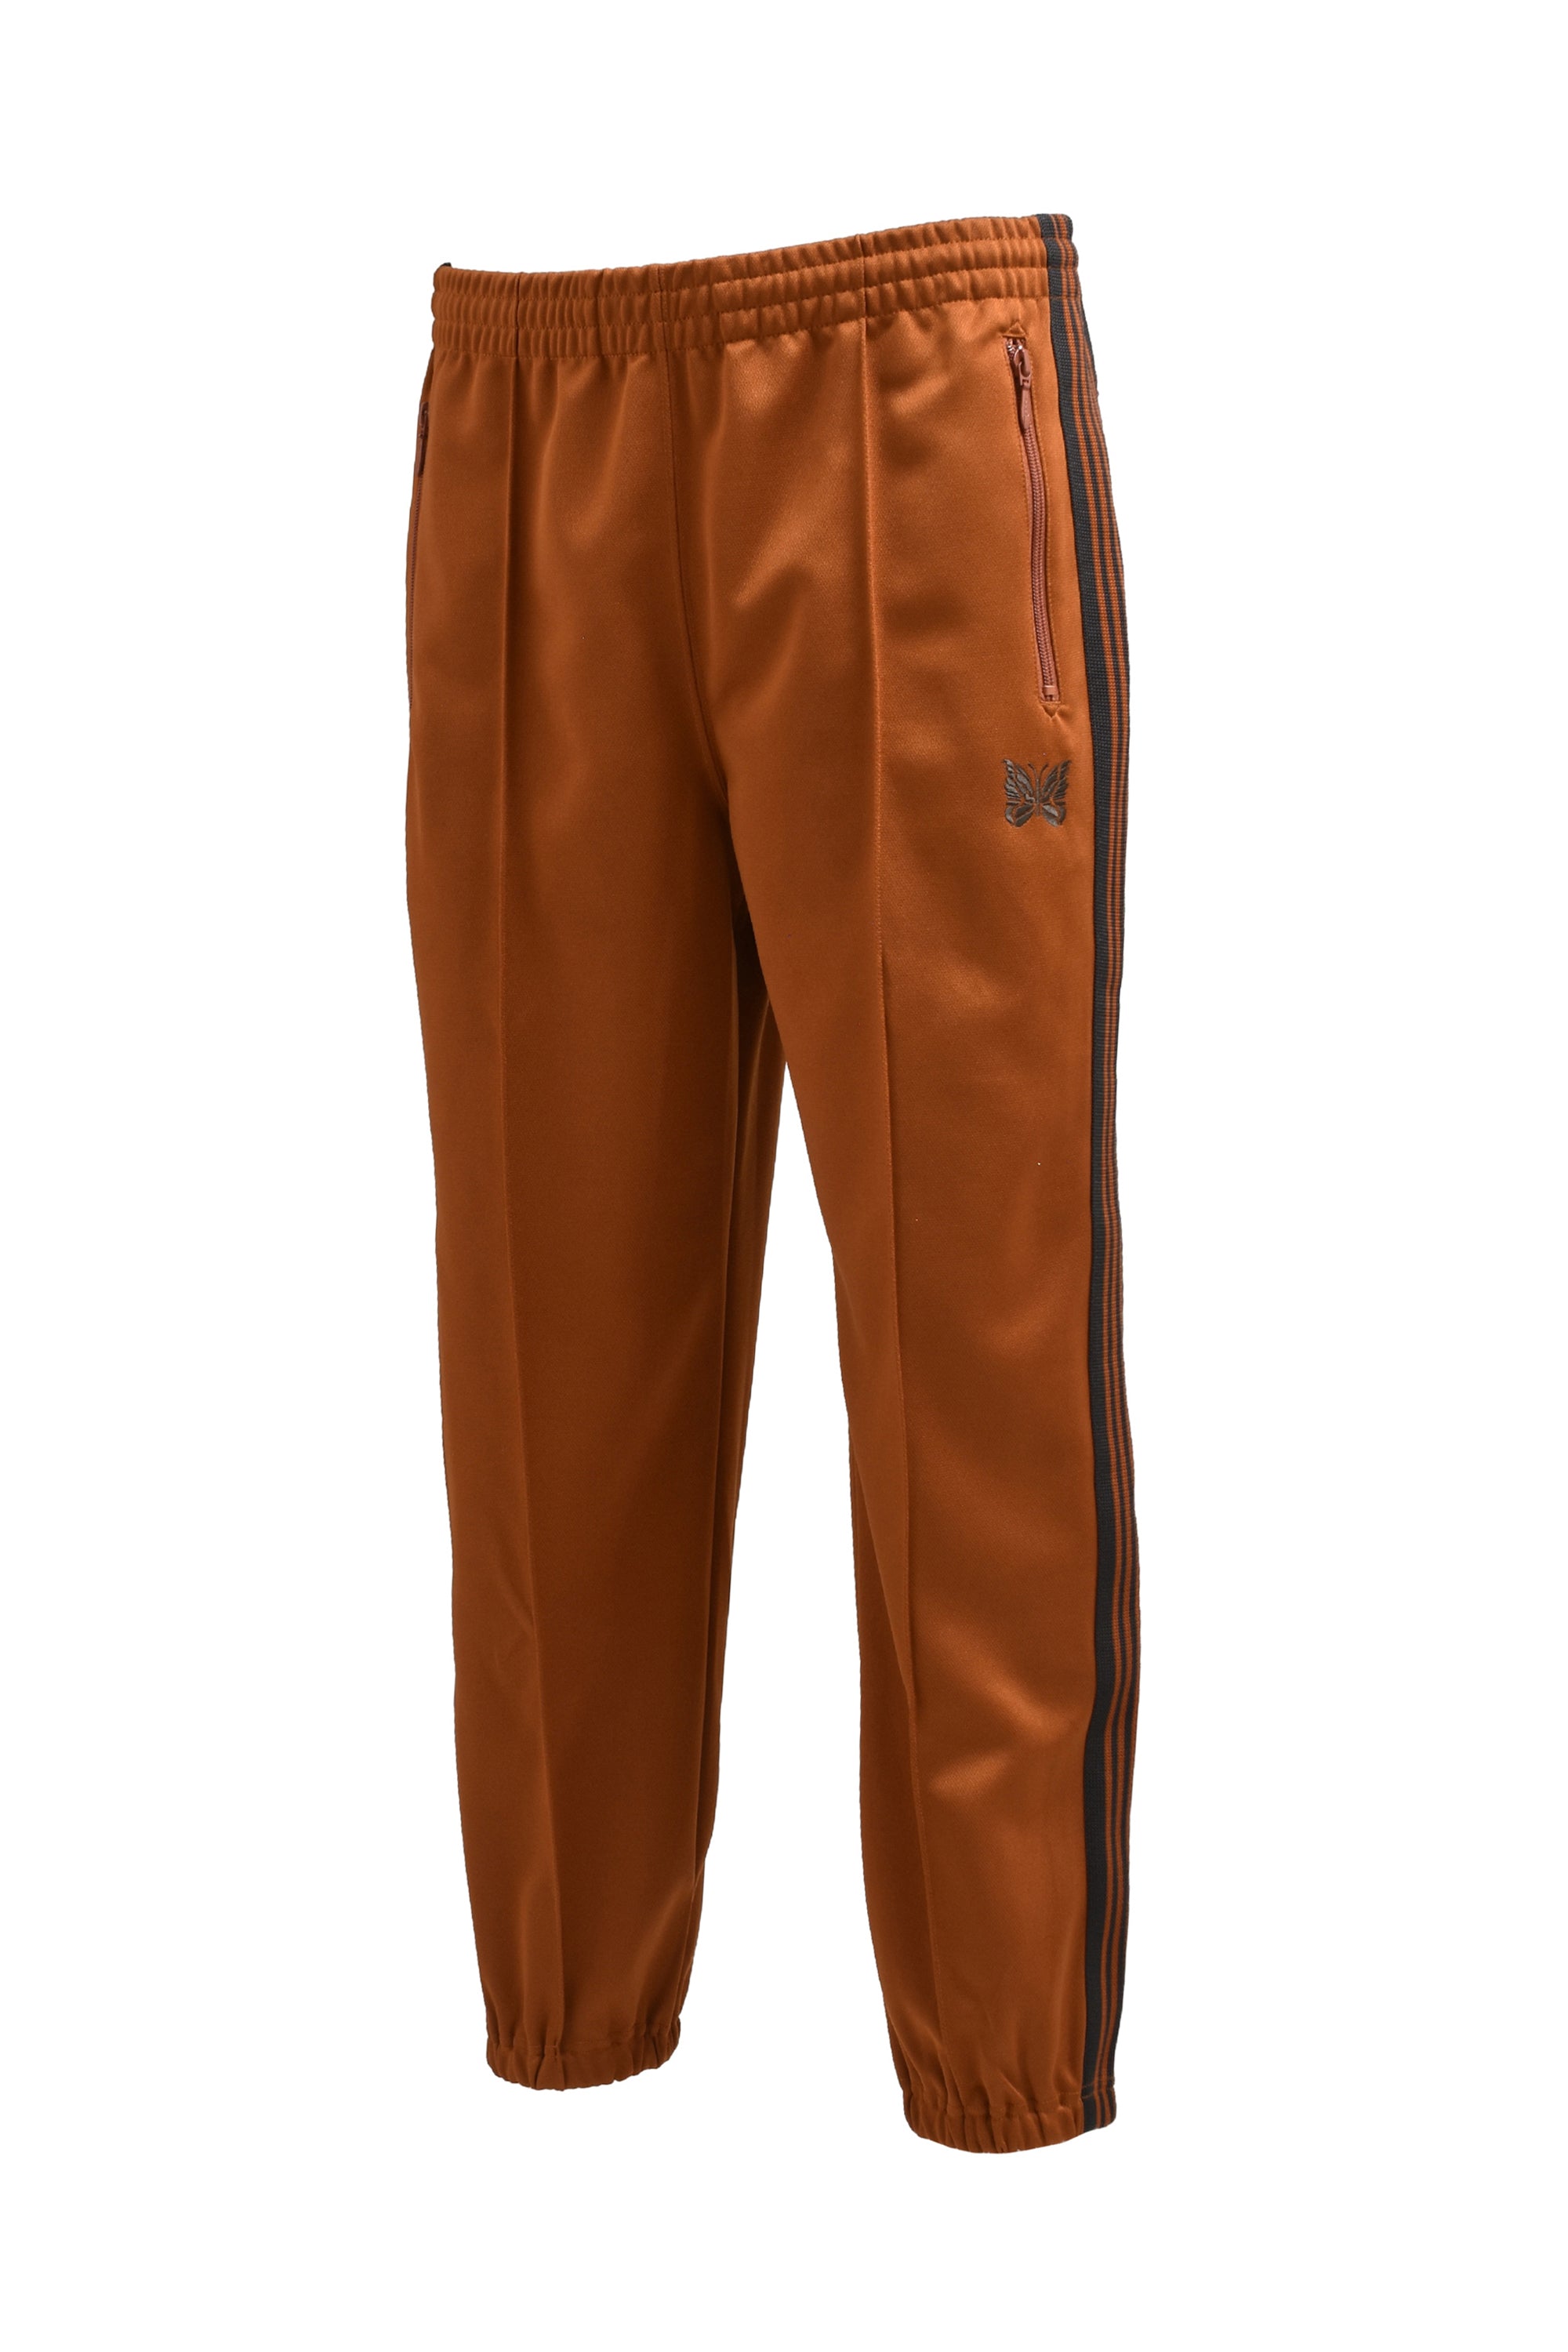 Needles ニードルスSS24 ZIPPED TRACK PANT - POLY SMOOTH / RUST - NUBIAN